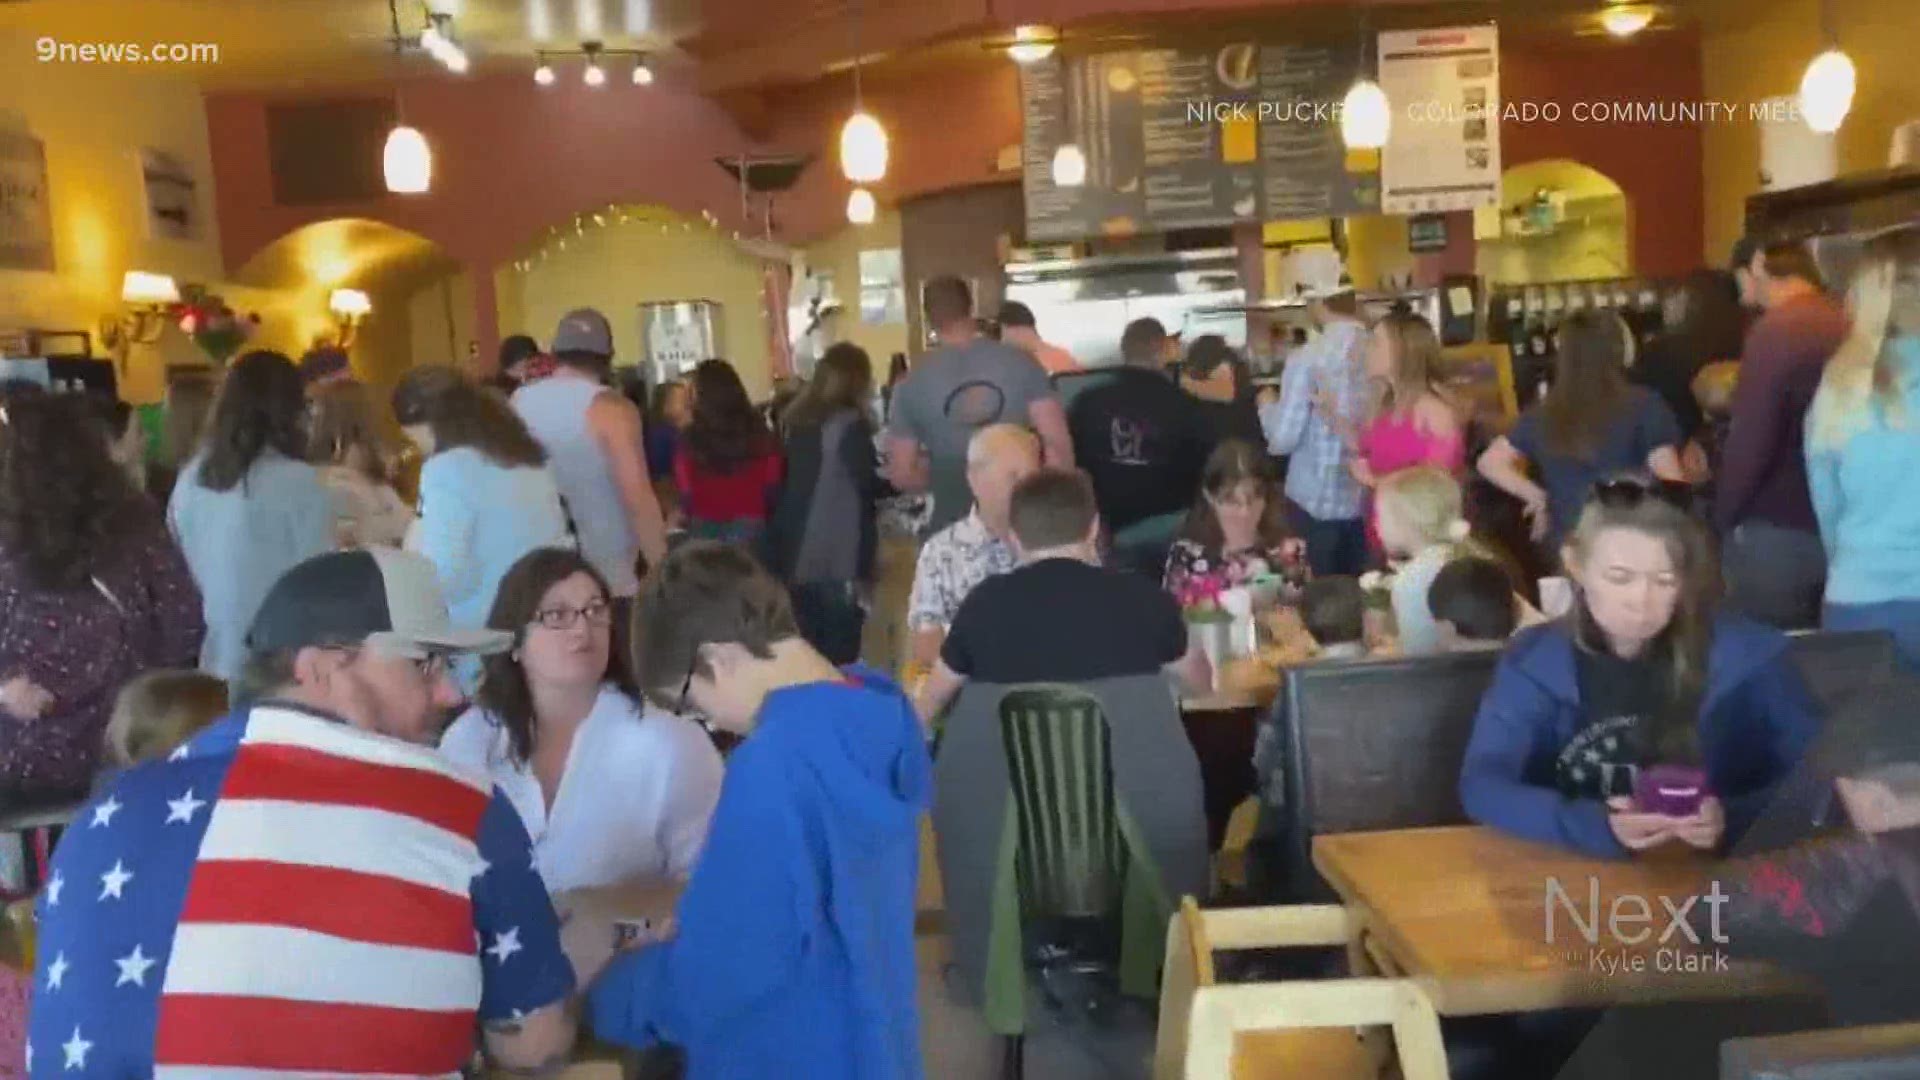 Colorado Gov. Jared Polis said the state health department suspended C&C Cafe's license after opening on Mother's Day, violating public health rules during COVID-19.